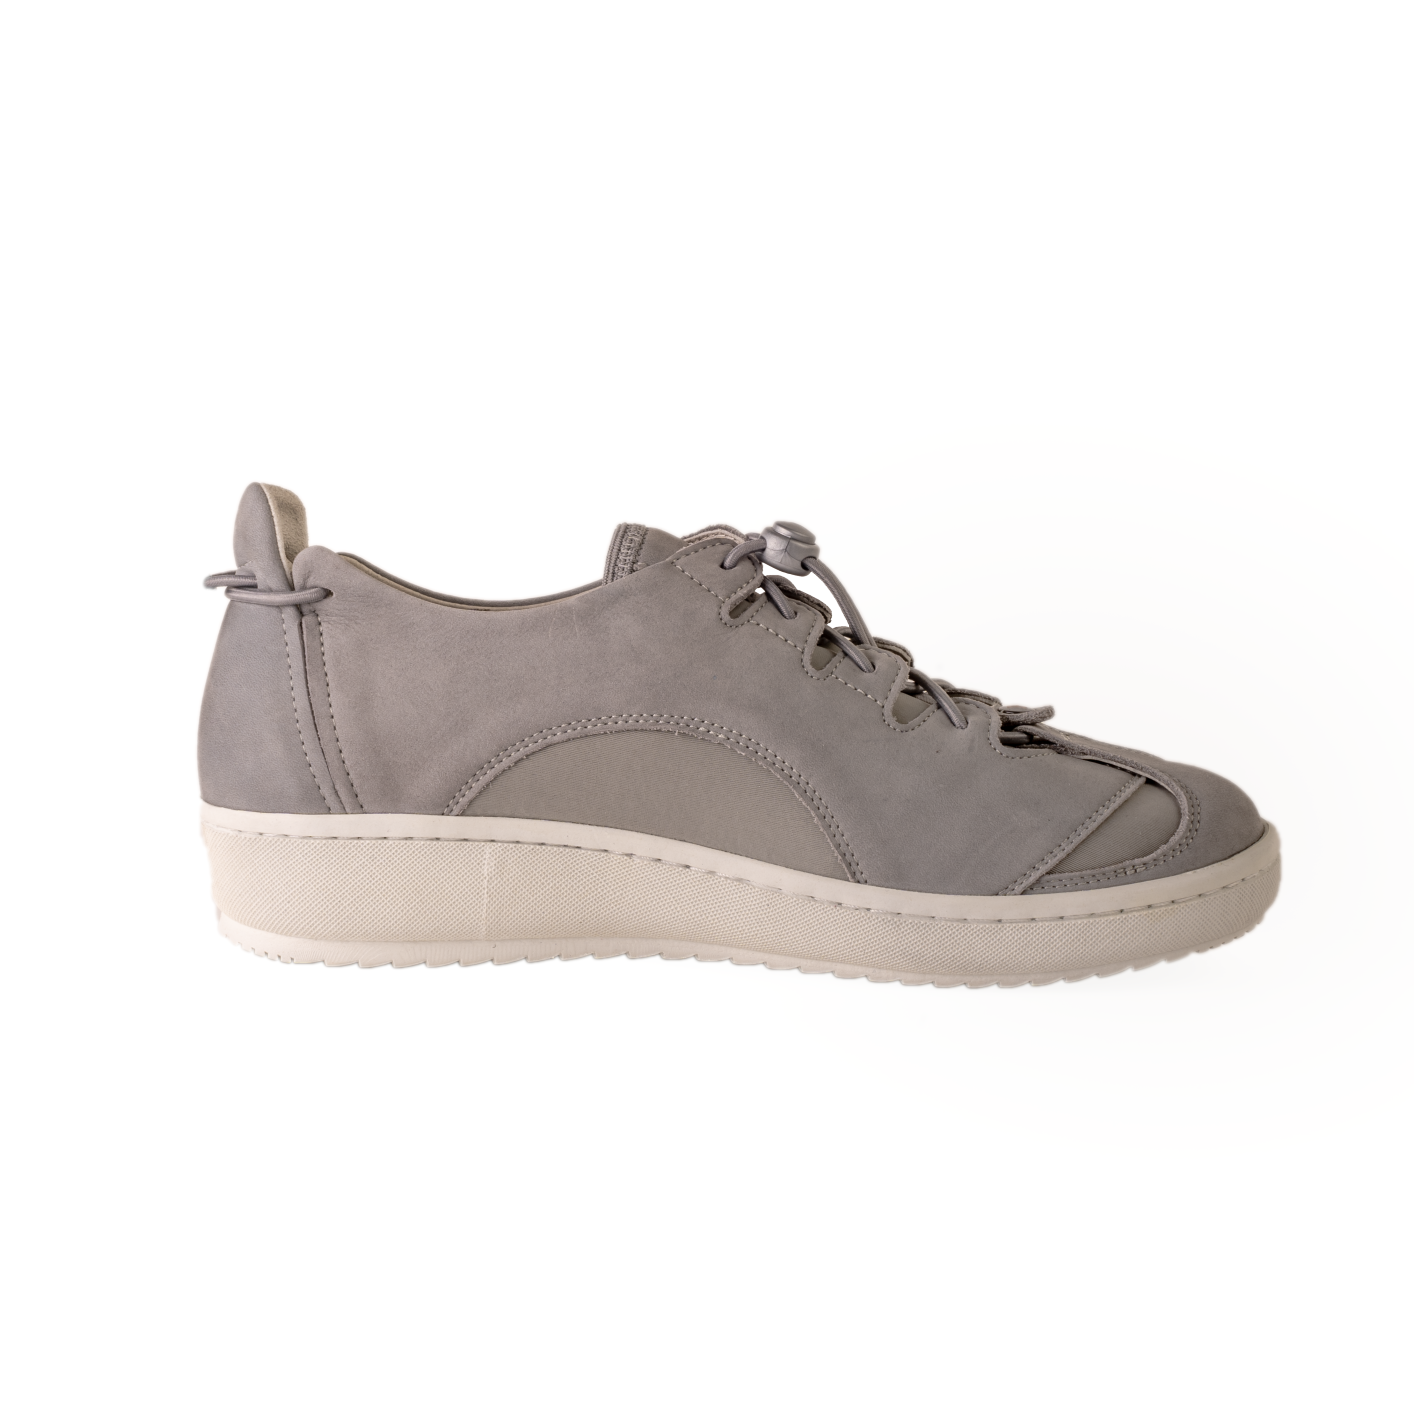 Pandere Barista Shoe | Womens Shoes For Swollen Feet - Pandere Shoes